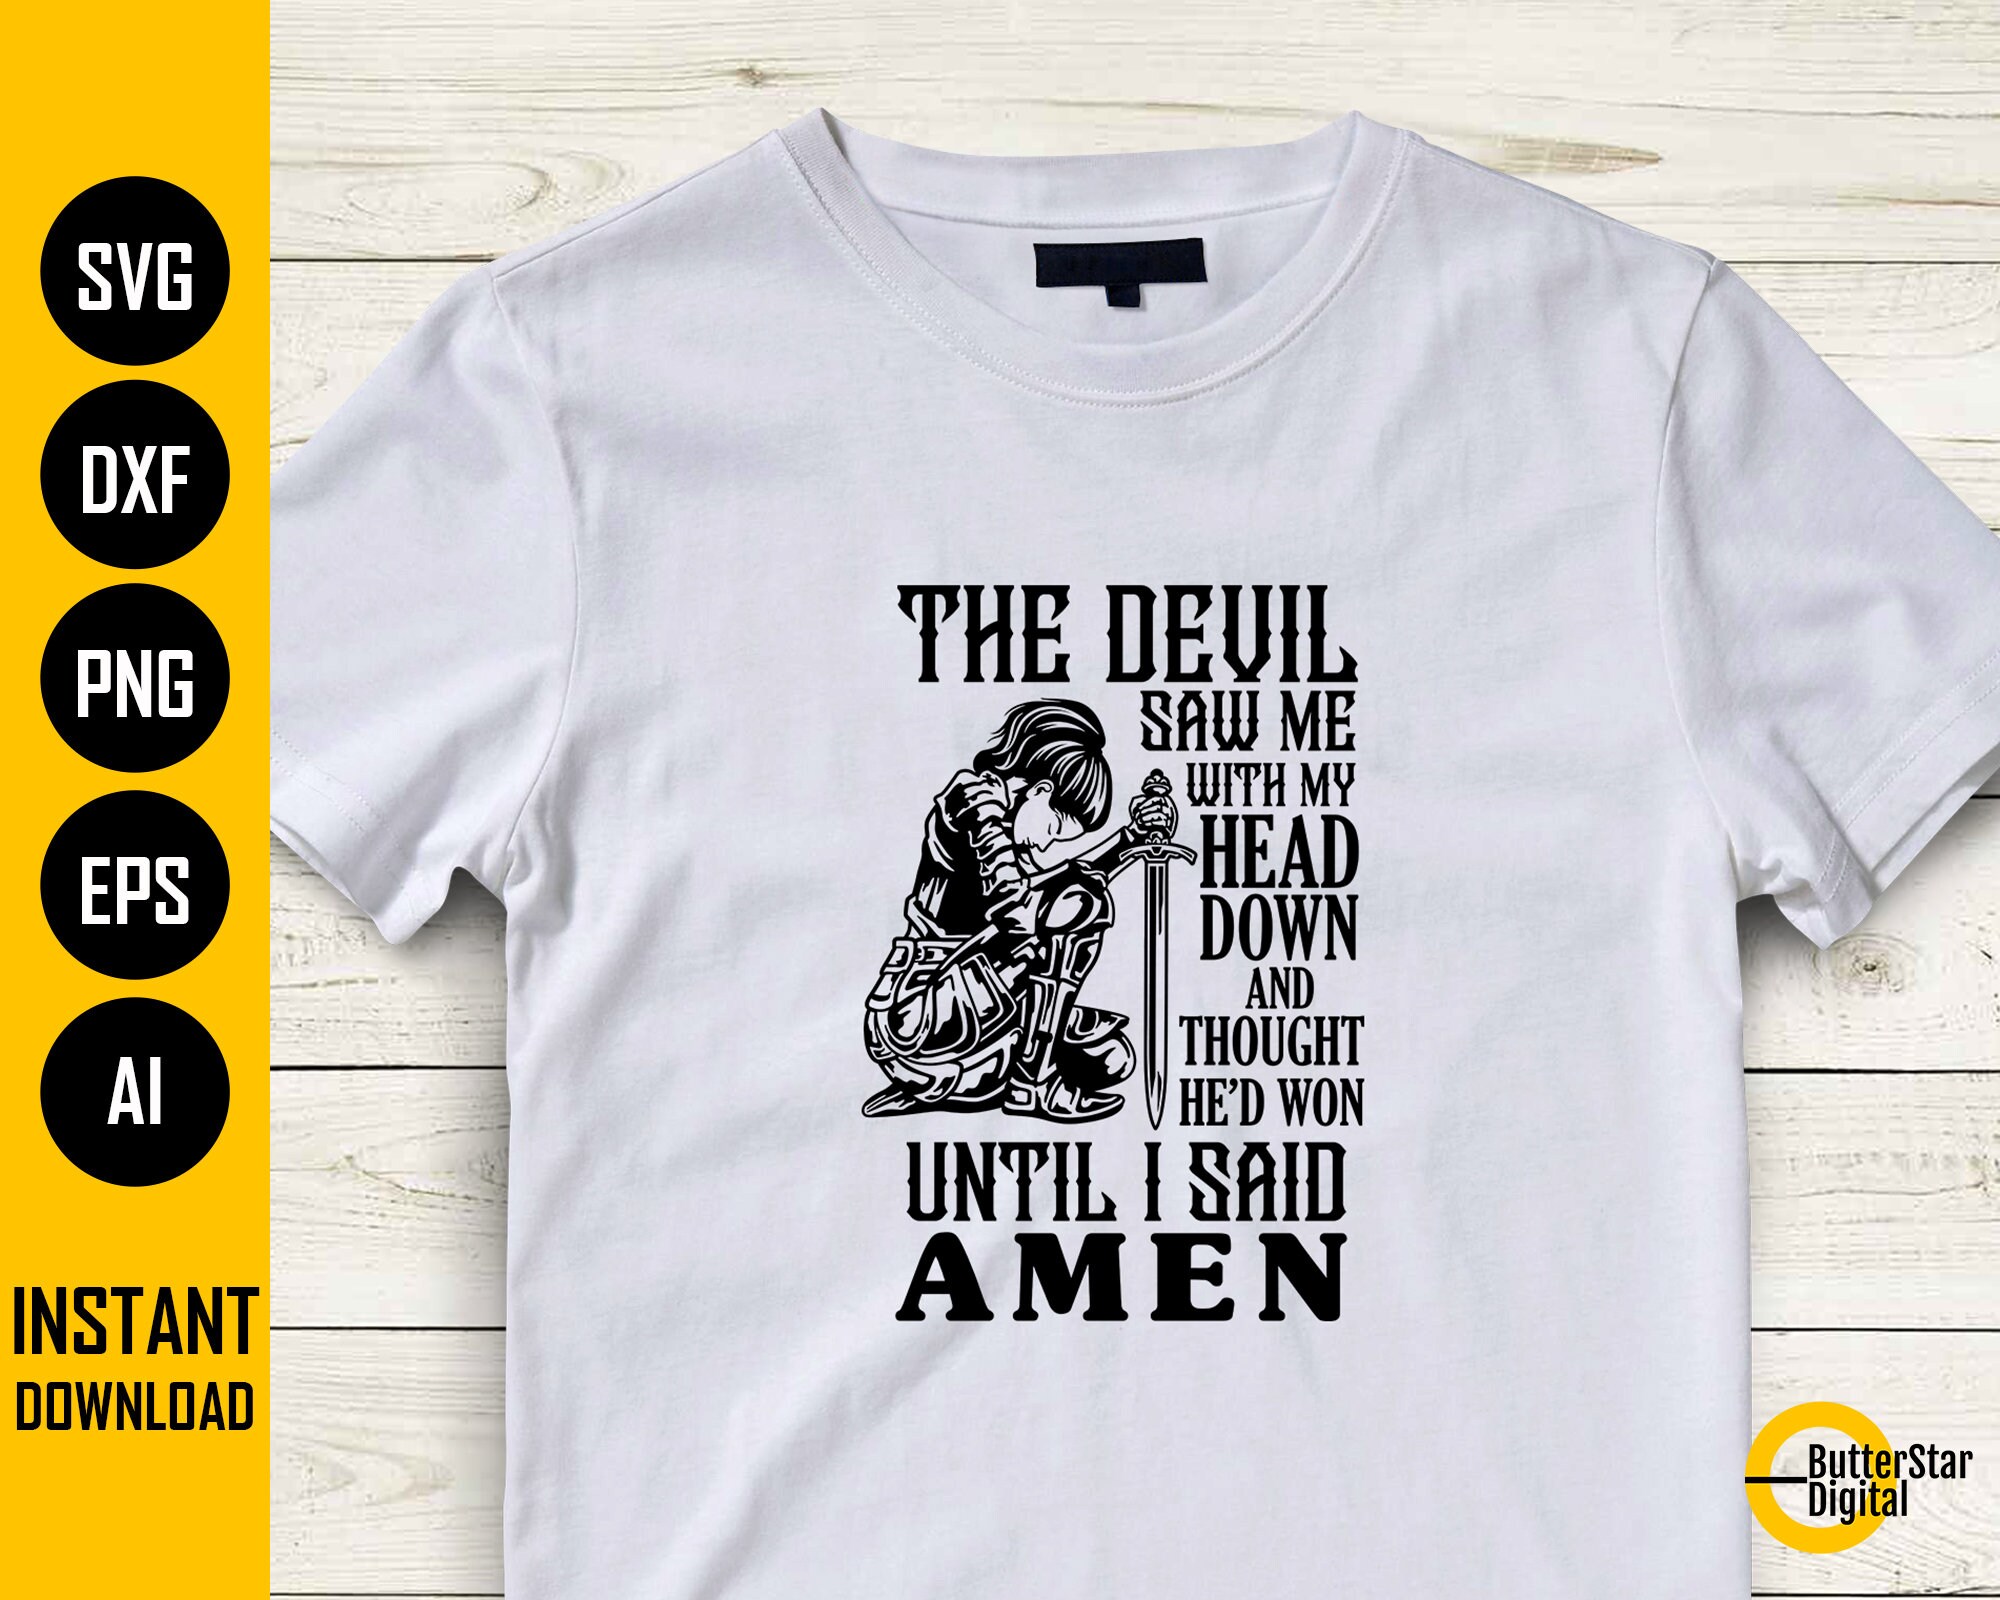 Won Eps - and Digital Dxf He\'d Until SVG Devil With Down Amen Said Art Me My Saw T-shirt Cut Png Vector Clip Head Thought File The Etsy Ai I Decal